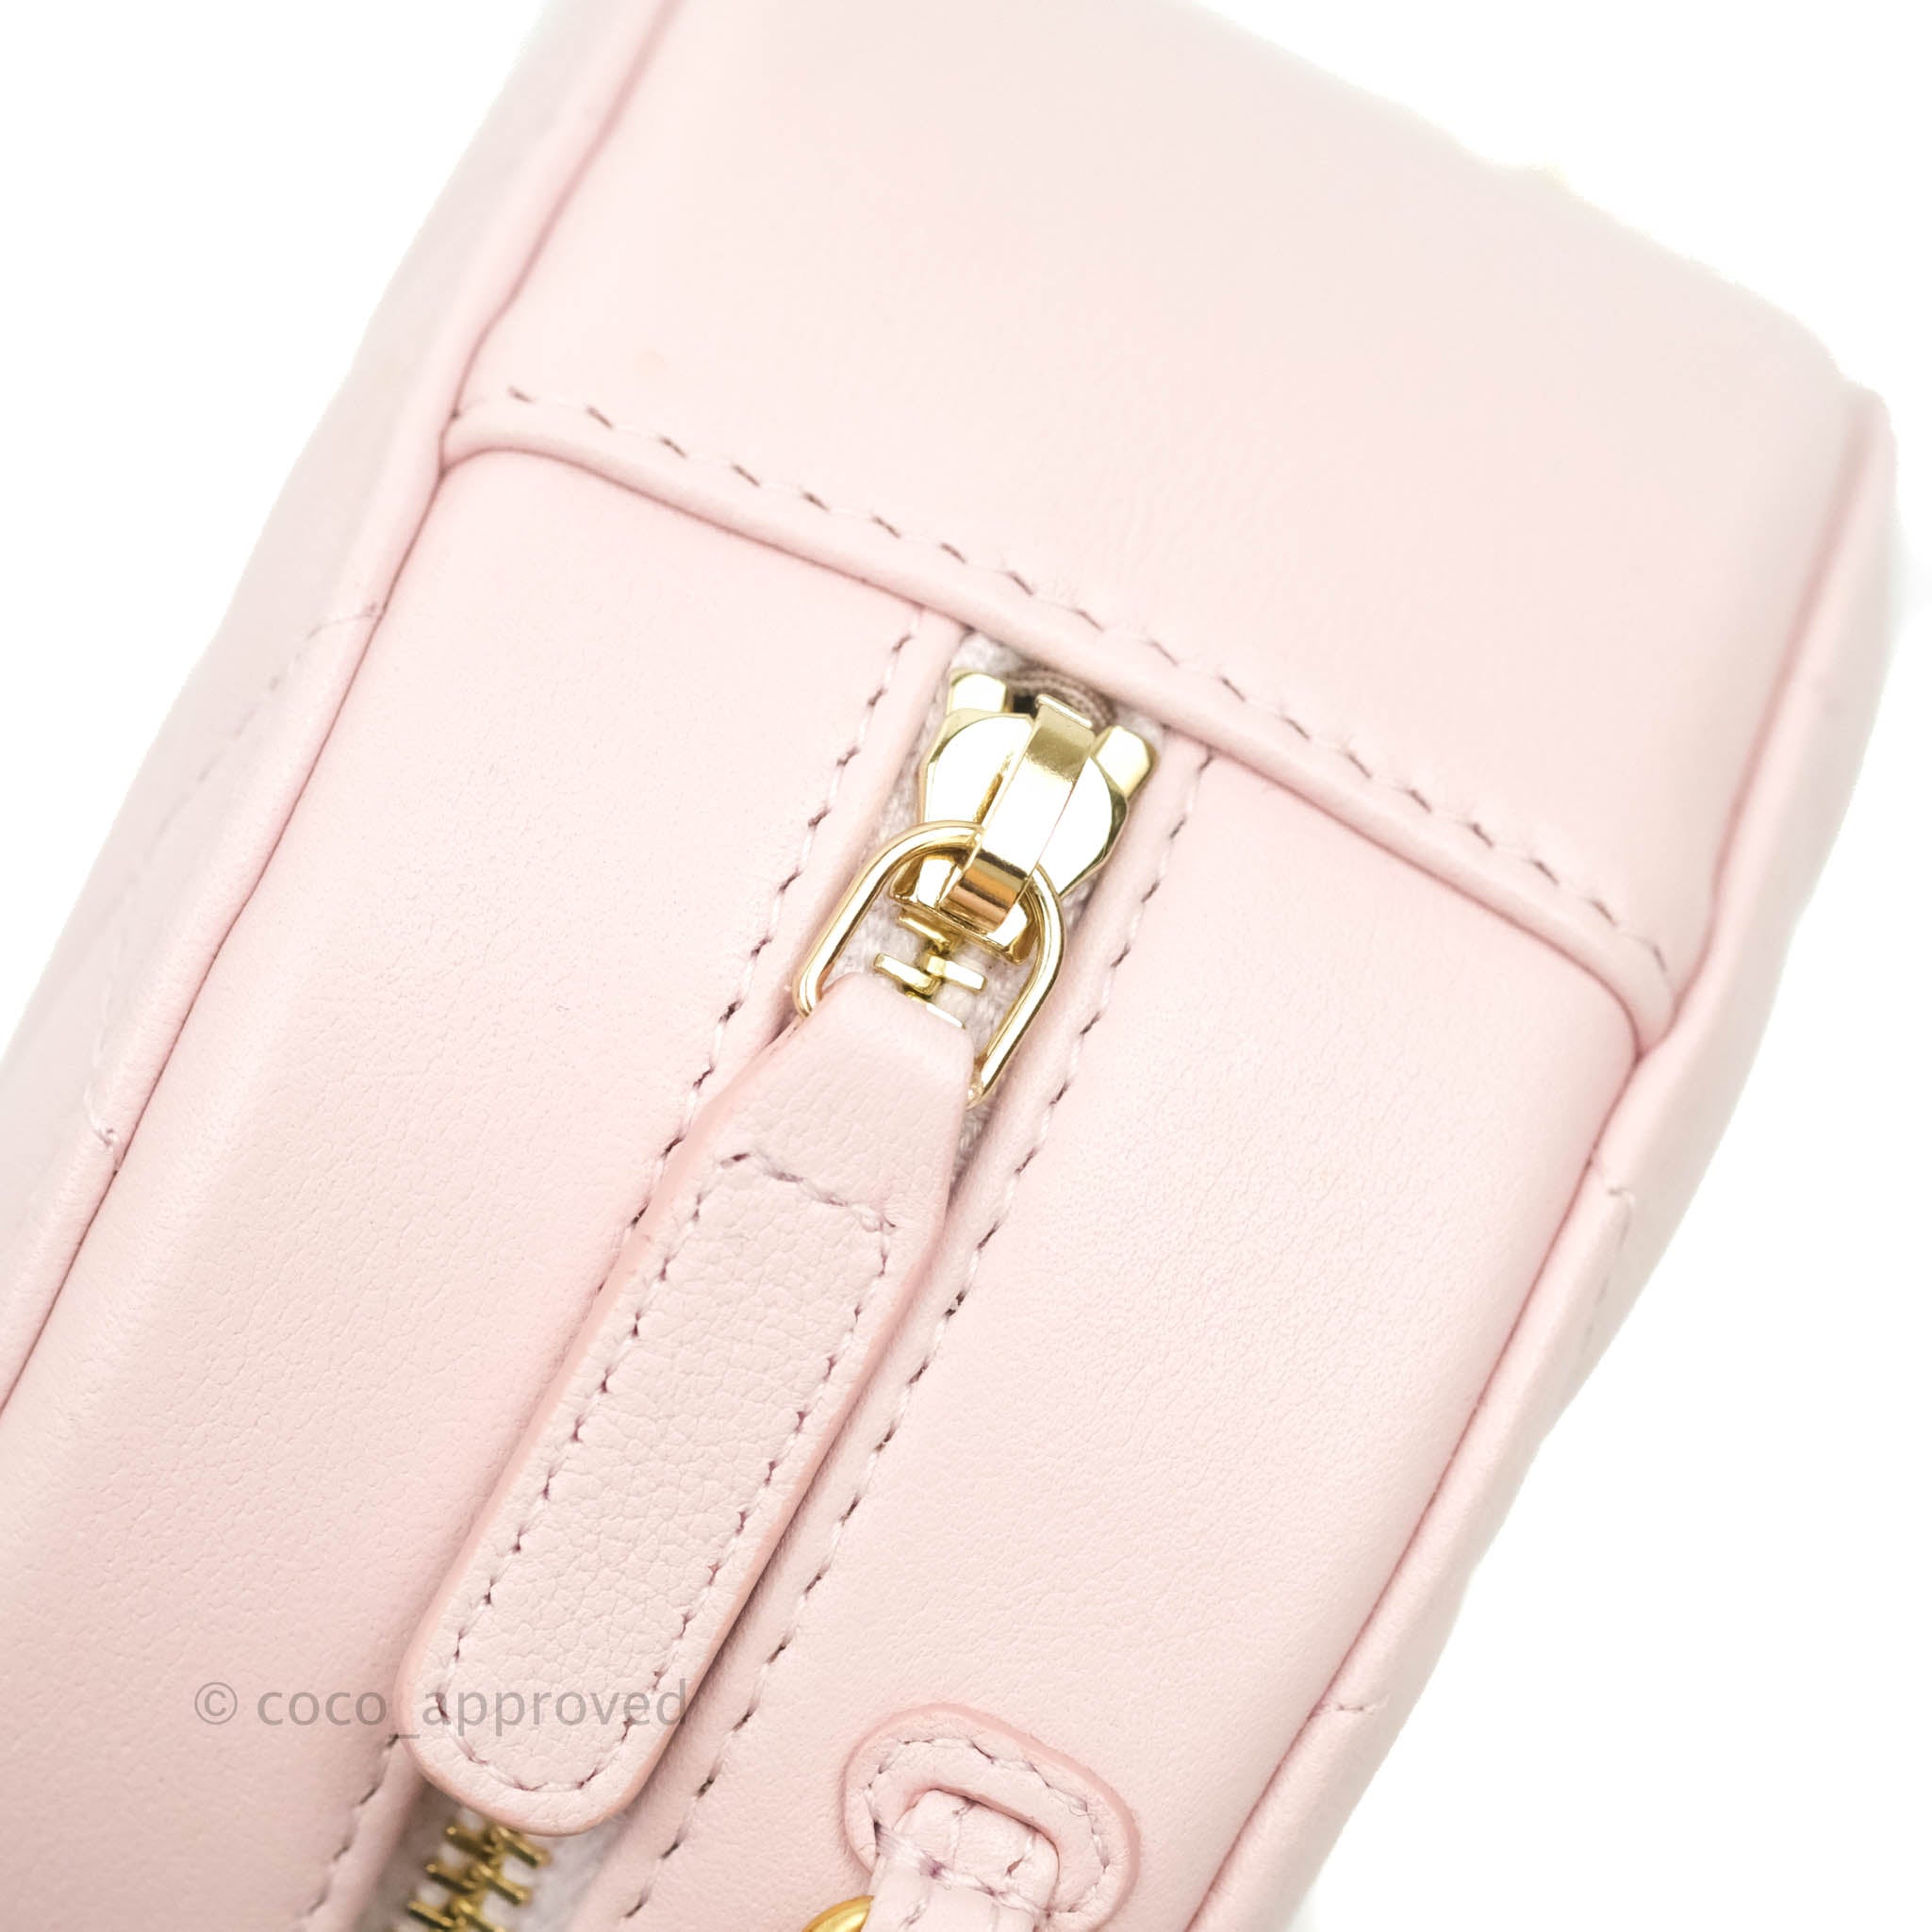 Chanel Clutch with Chain AP3010 B09158 NK343, Pink, One Size